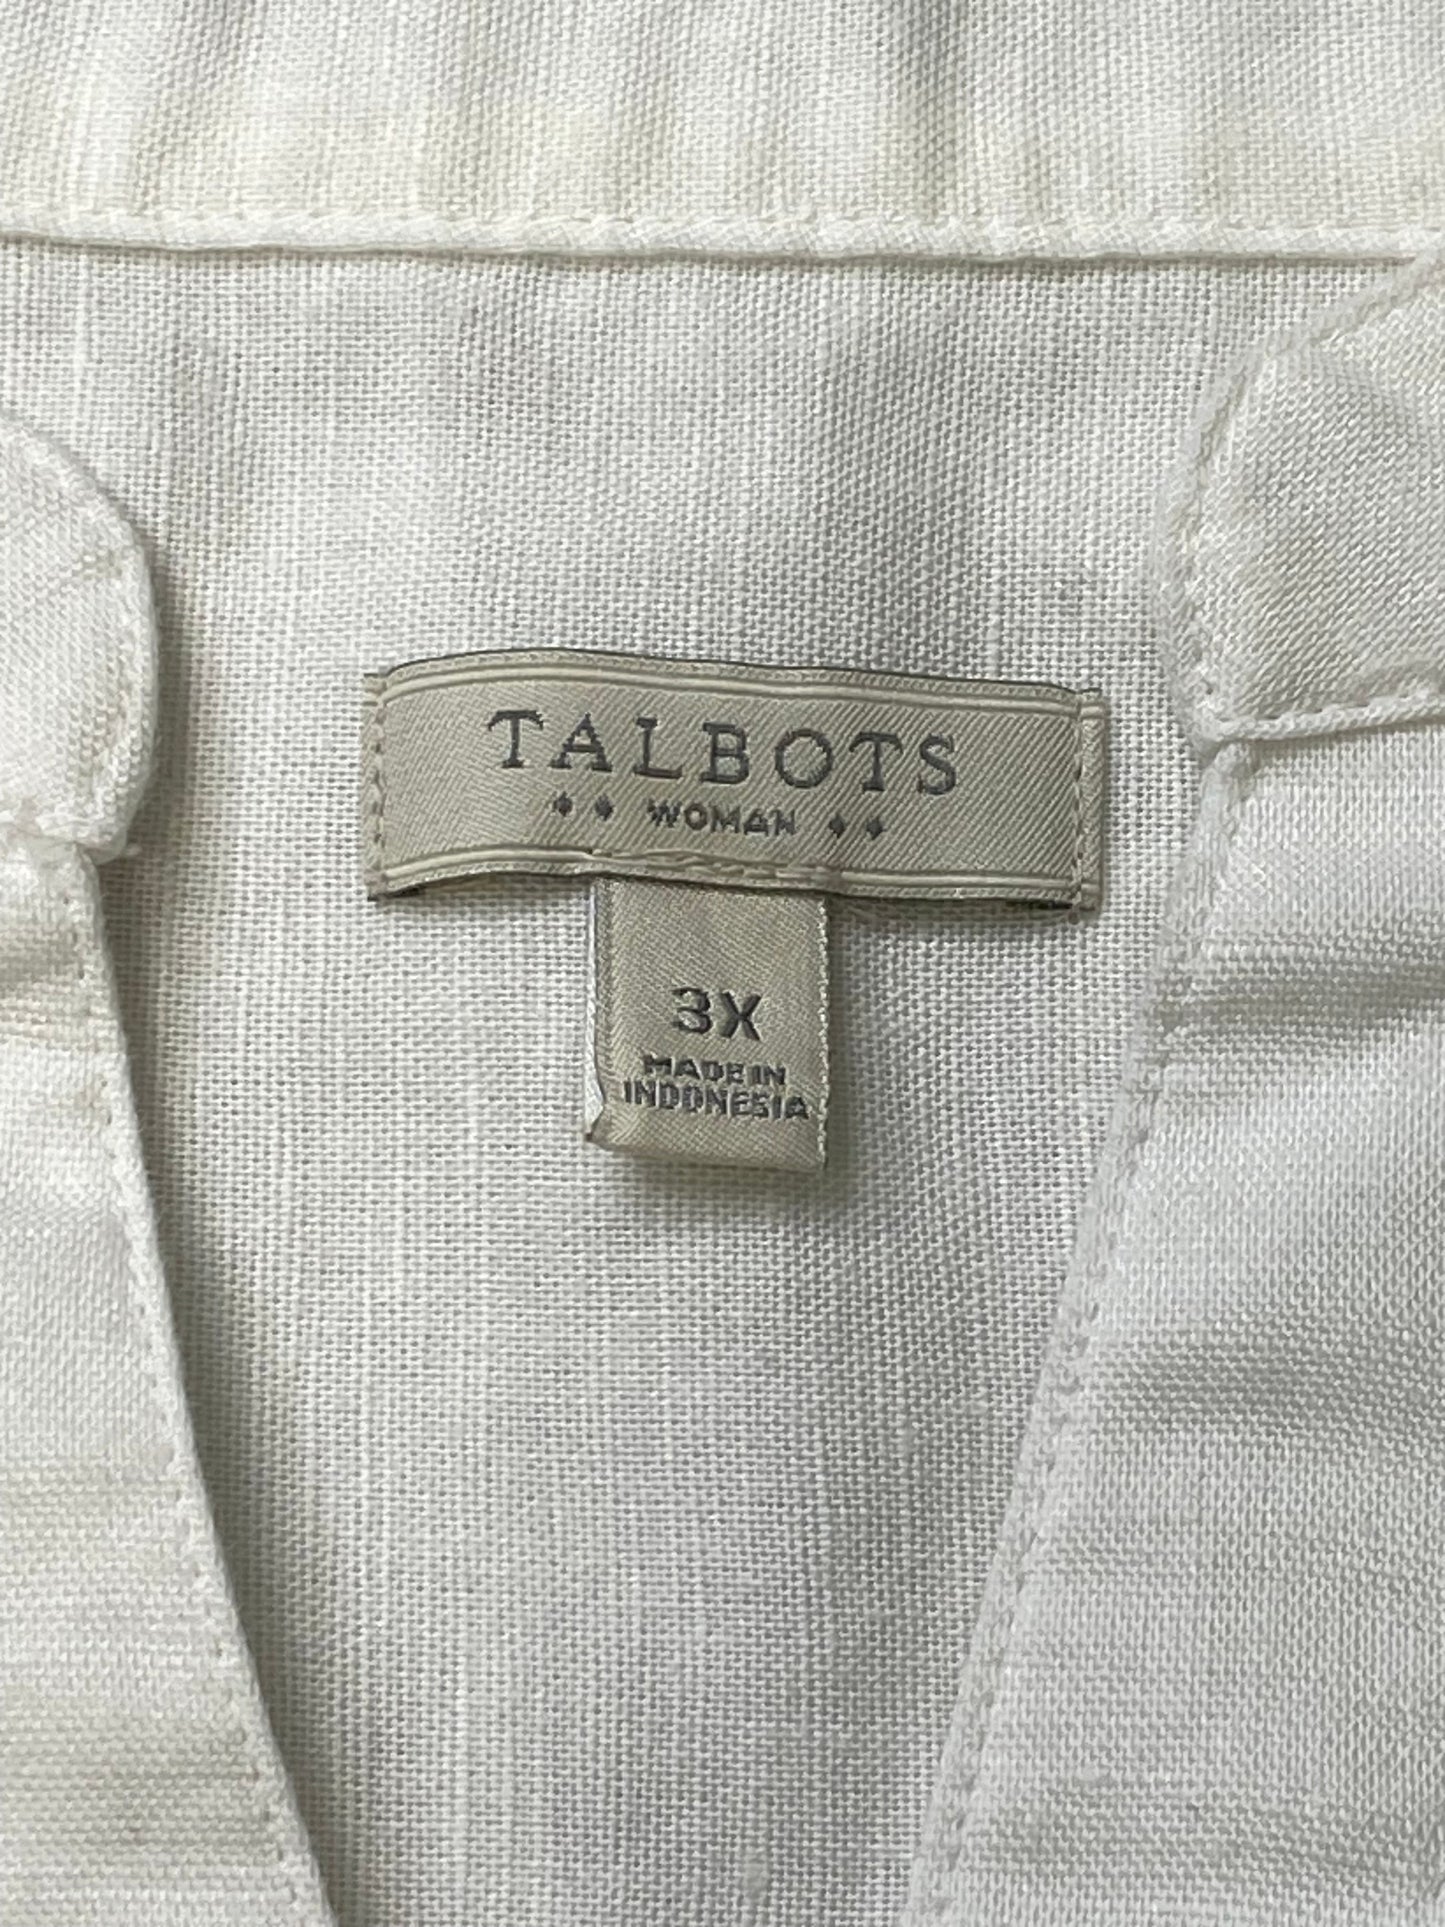 White Top Long Sleeve Talbots, Size 3x